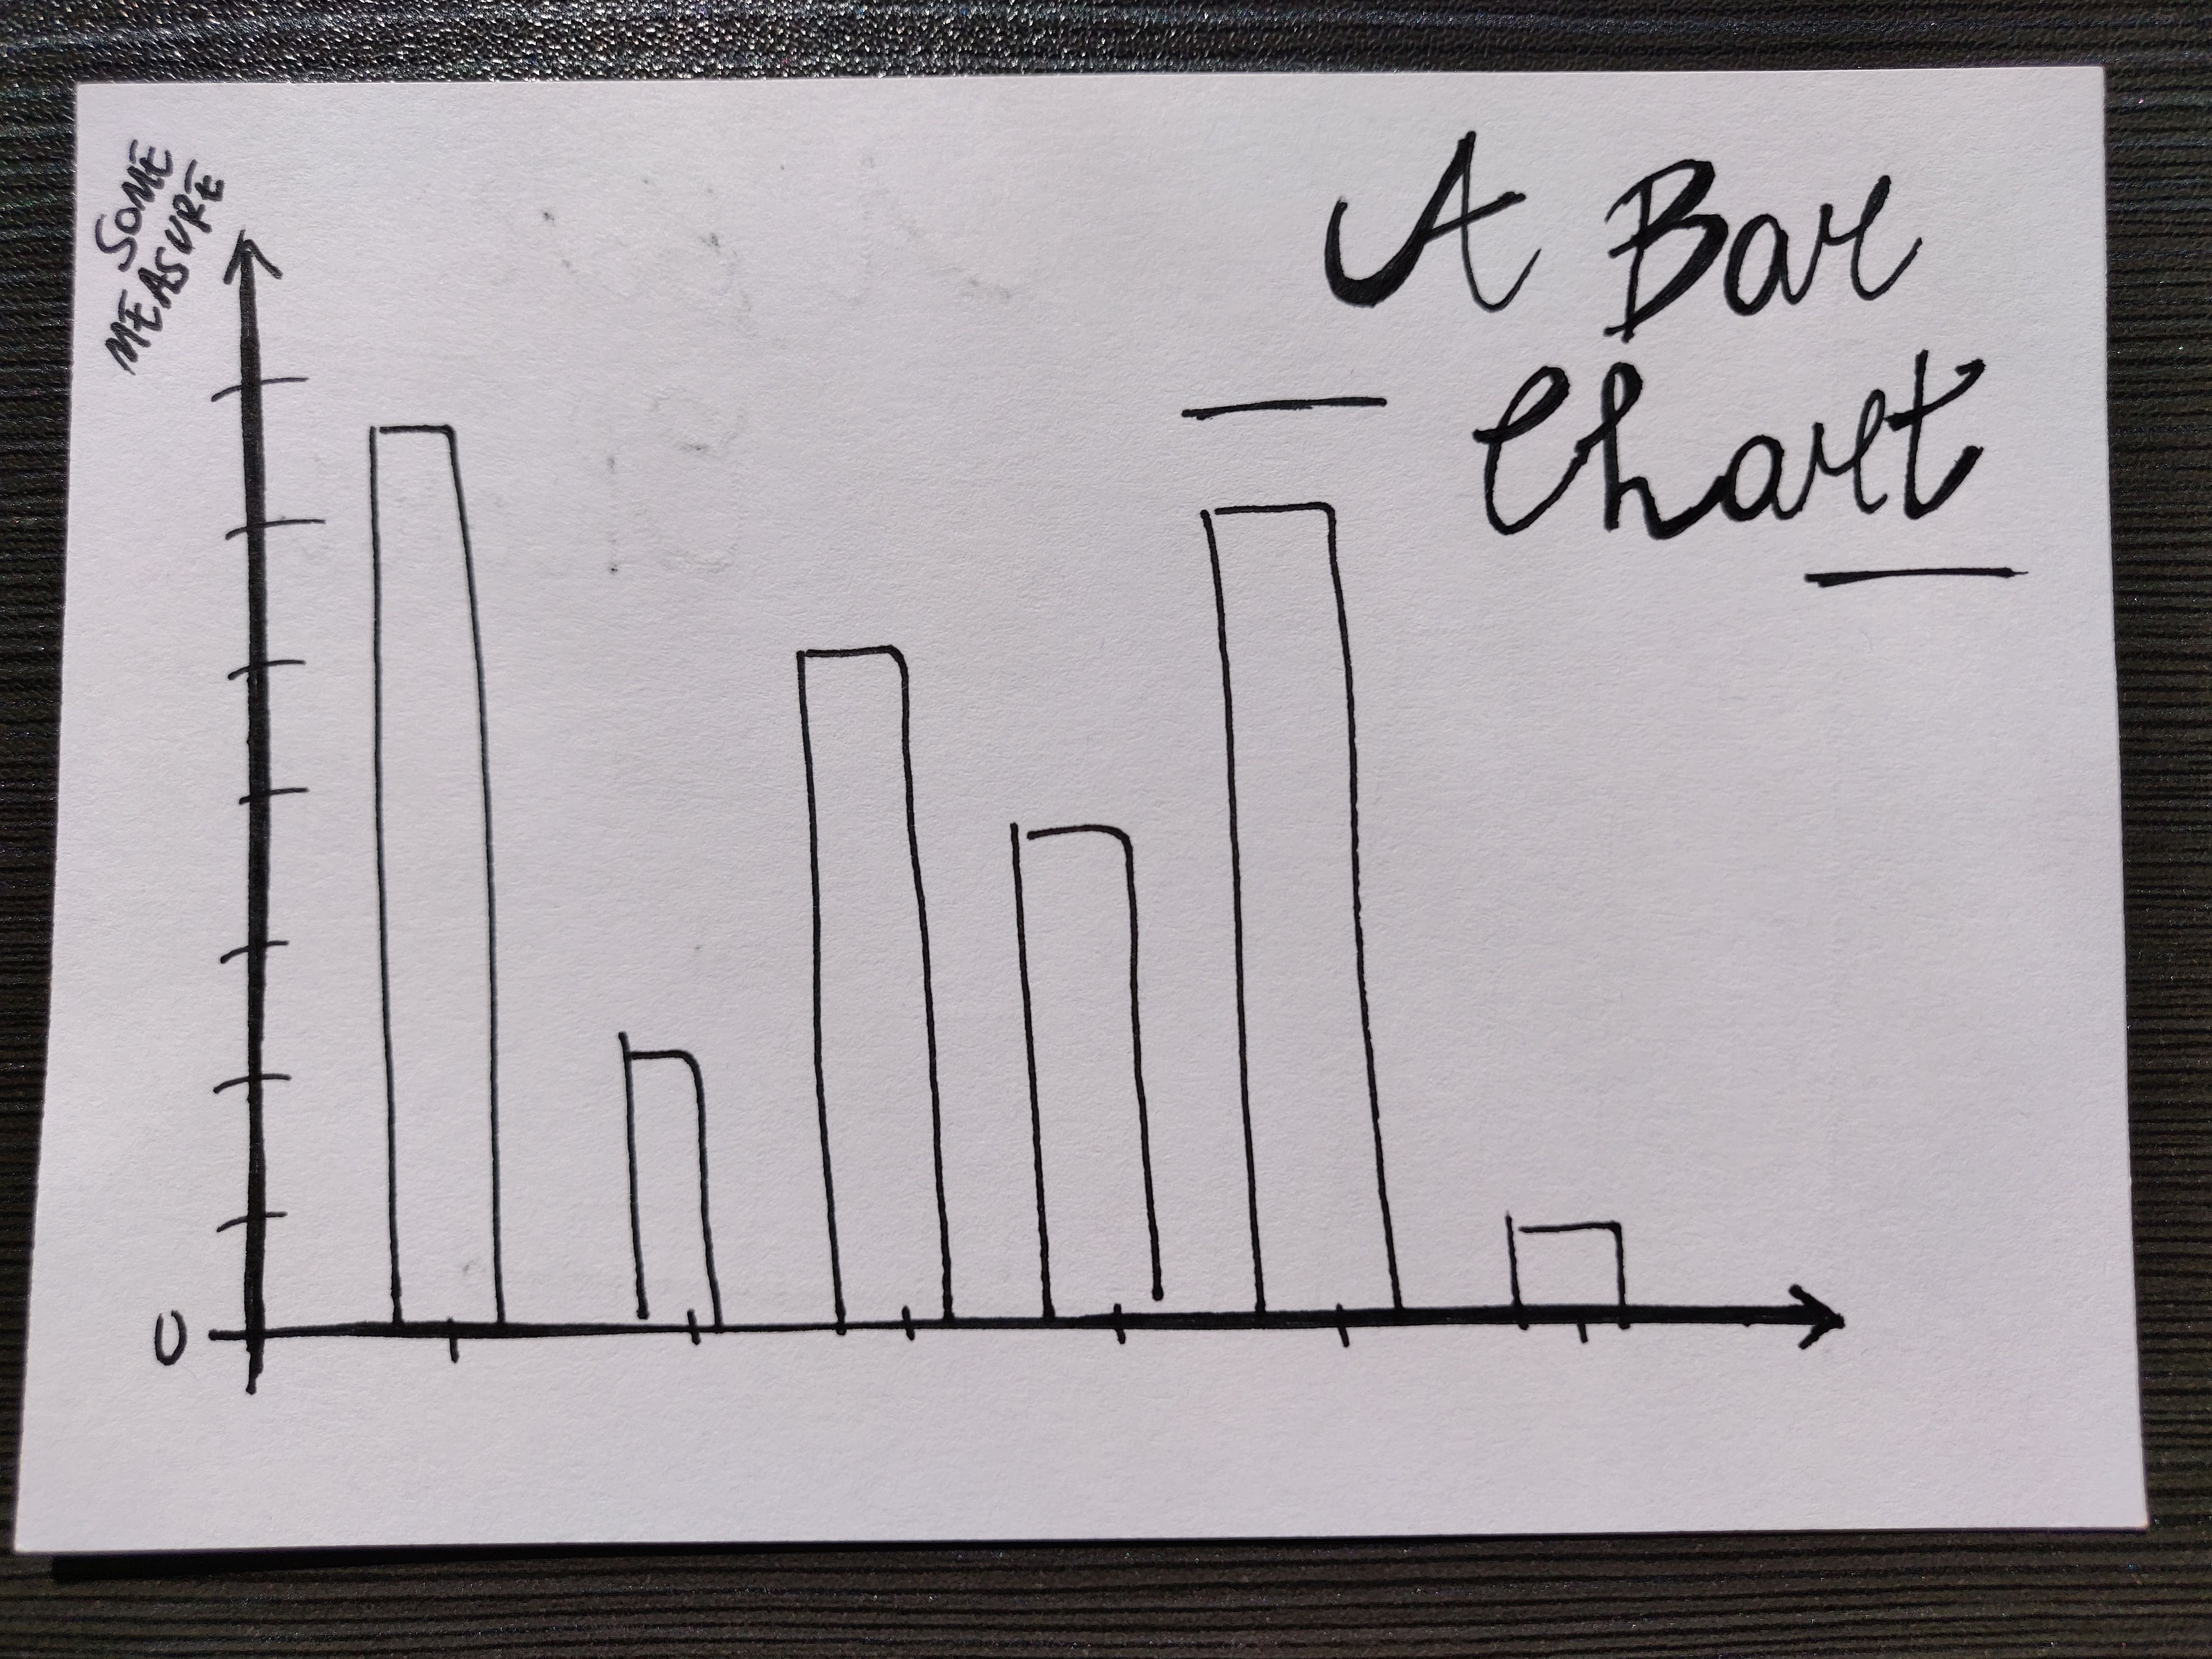 A plain bar chart, hand-drawn, with nothing on the axes and no colour.